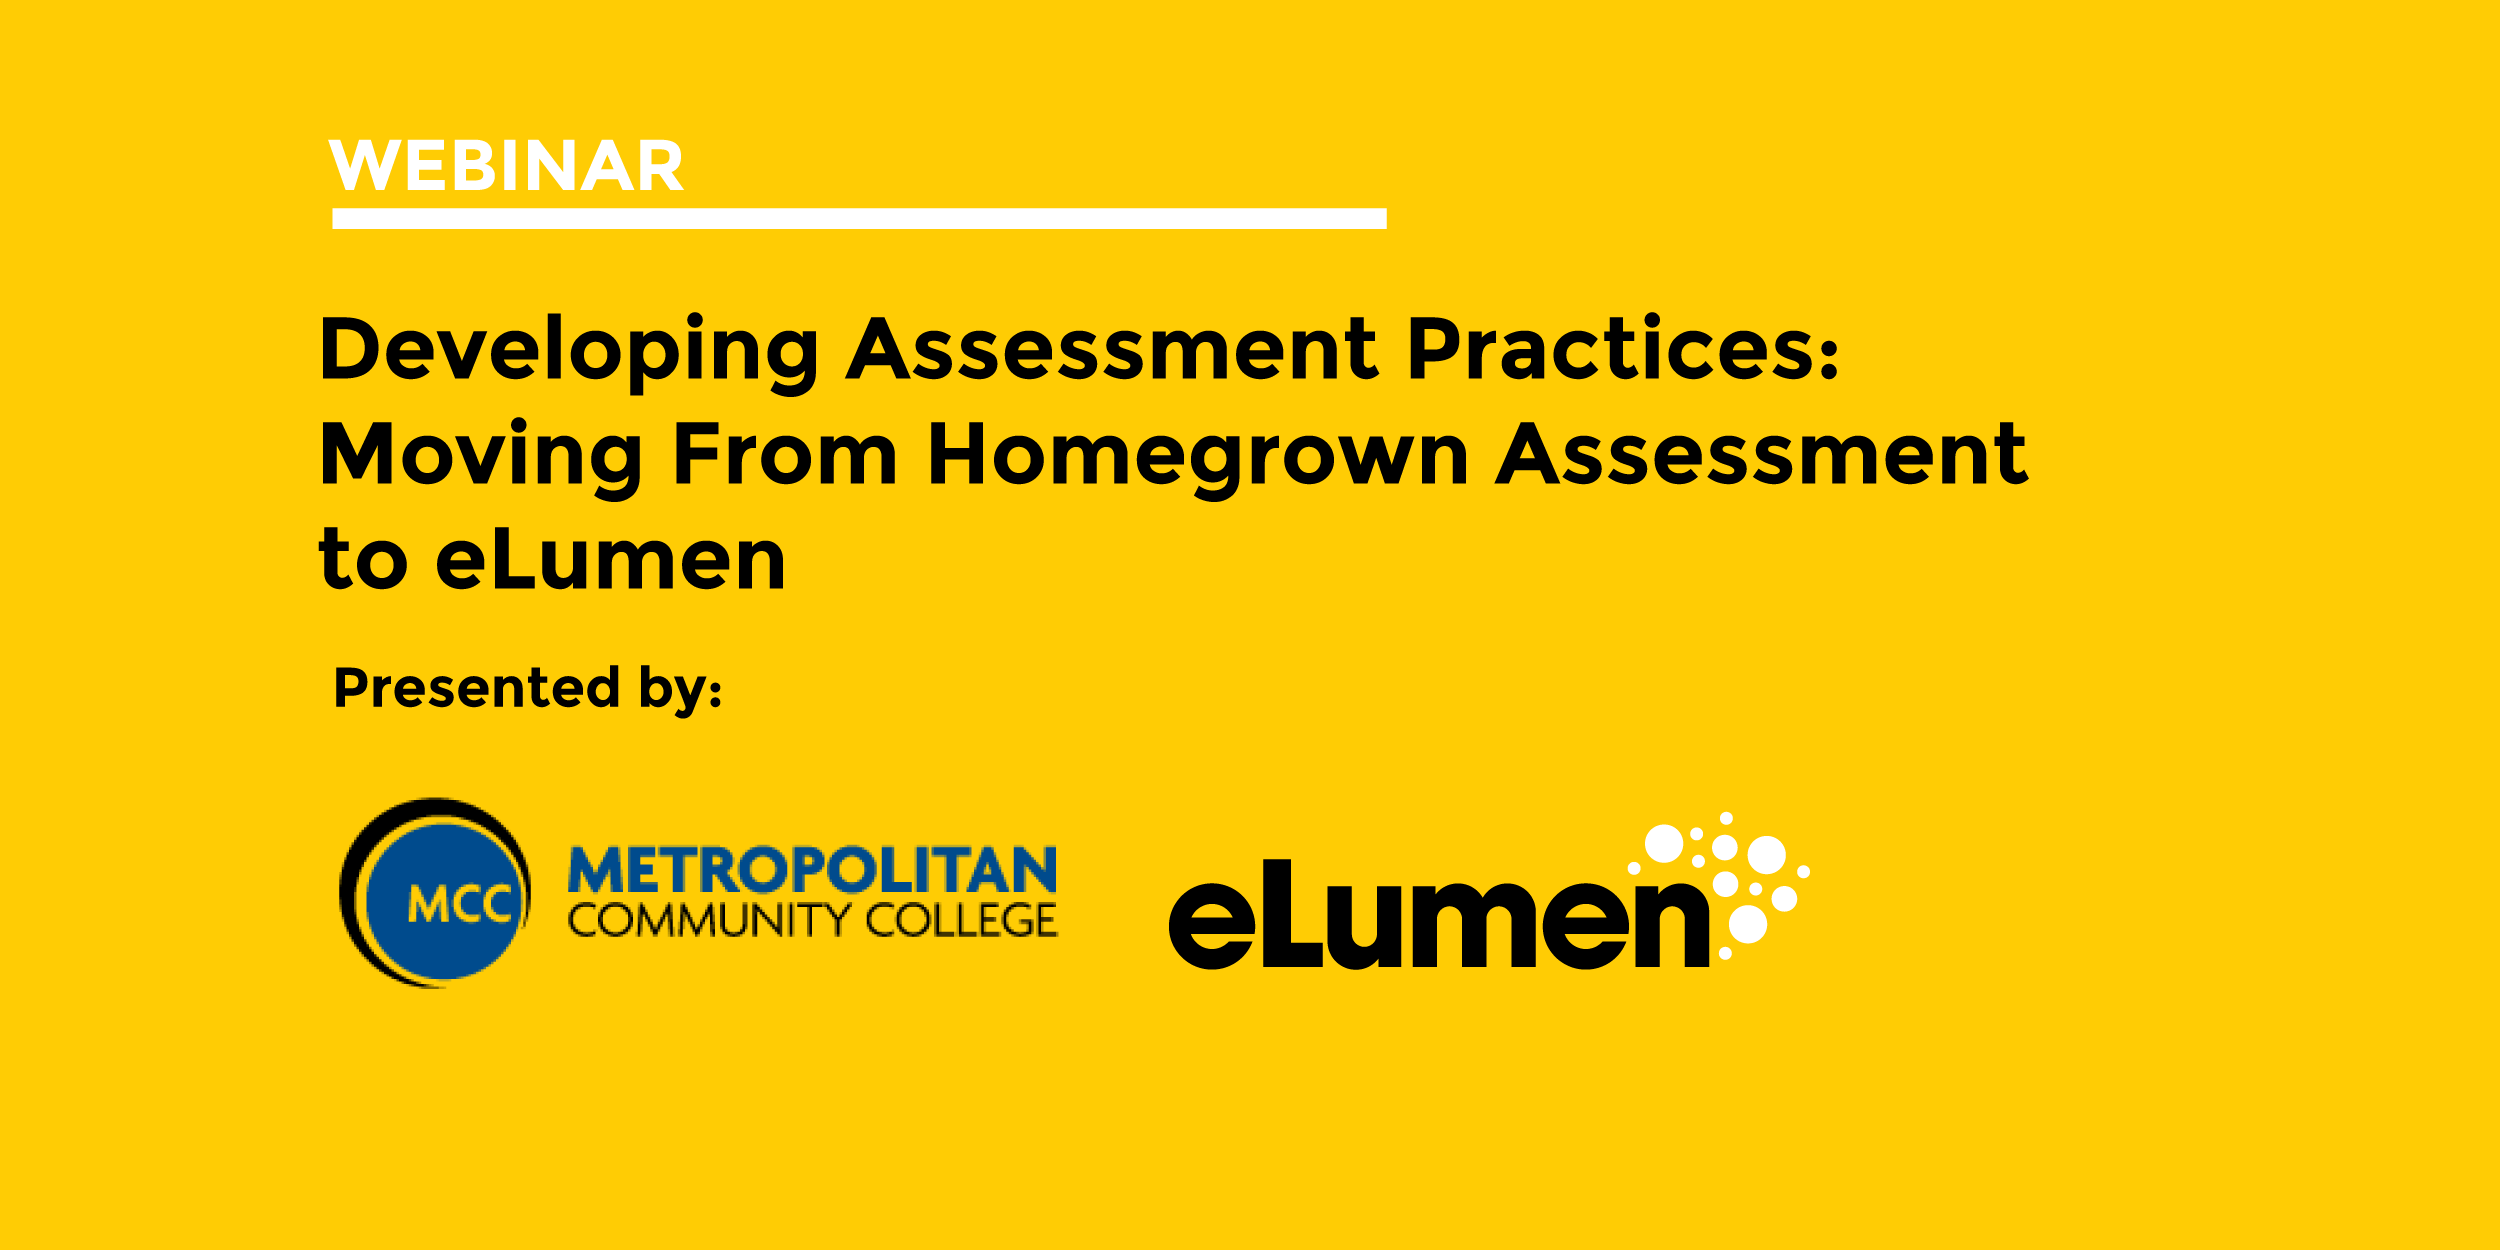 Developing Assessment Practices: Moving From Homegrown Assessment to eLumen. May 2022